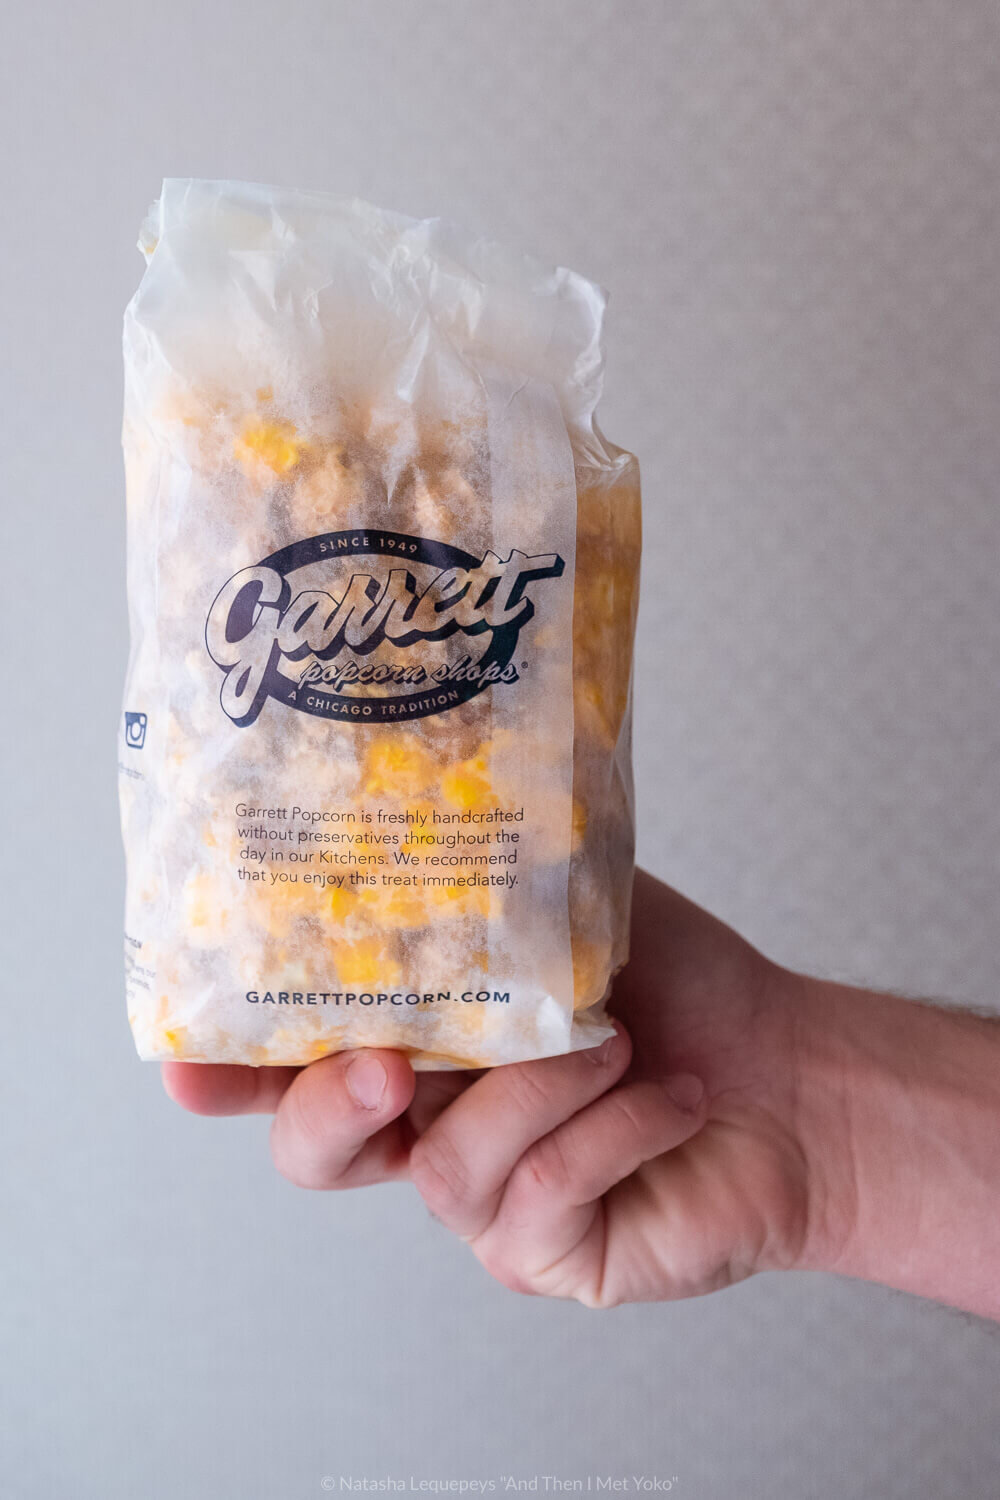 Chicago Mix from Garrett's Popcorn in Chicago, USA. Travel photography and guide by © Natasha Lequepeys for "And Then I Met Yoko". #chicago #usa #travelblog #travelphotography